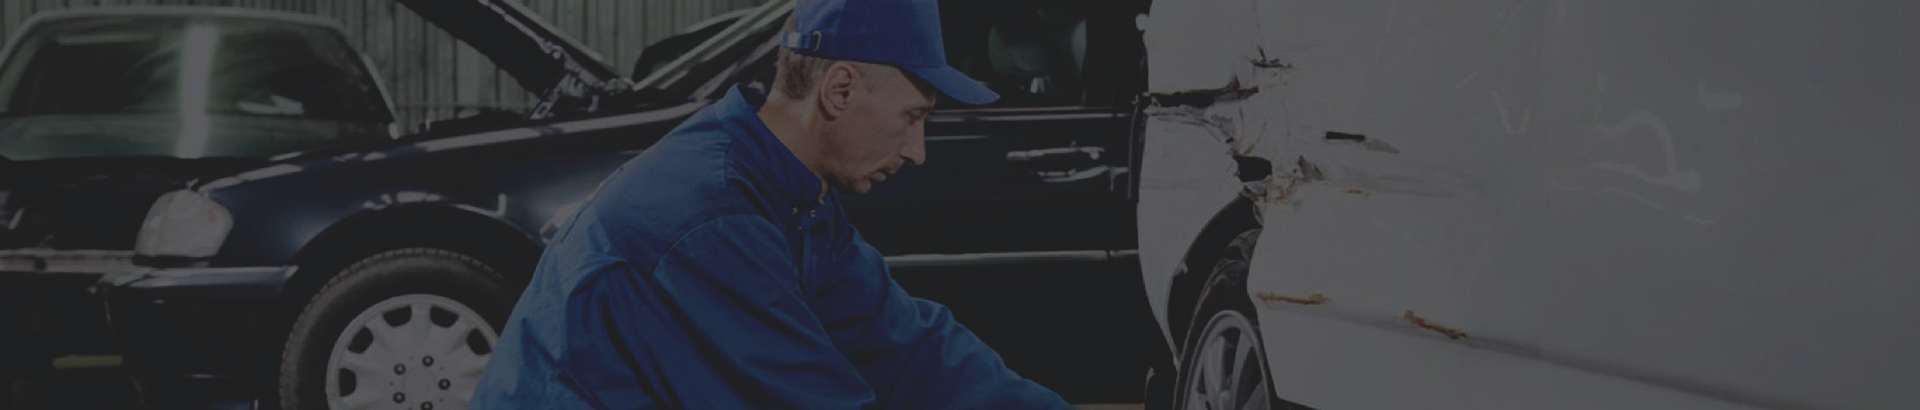 Maintenance and repair of motor vehicles and other related services, products, consultations